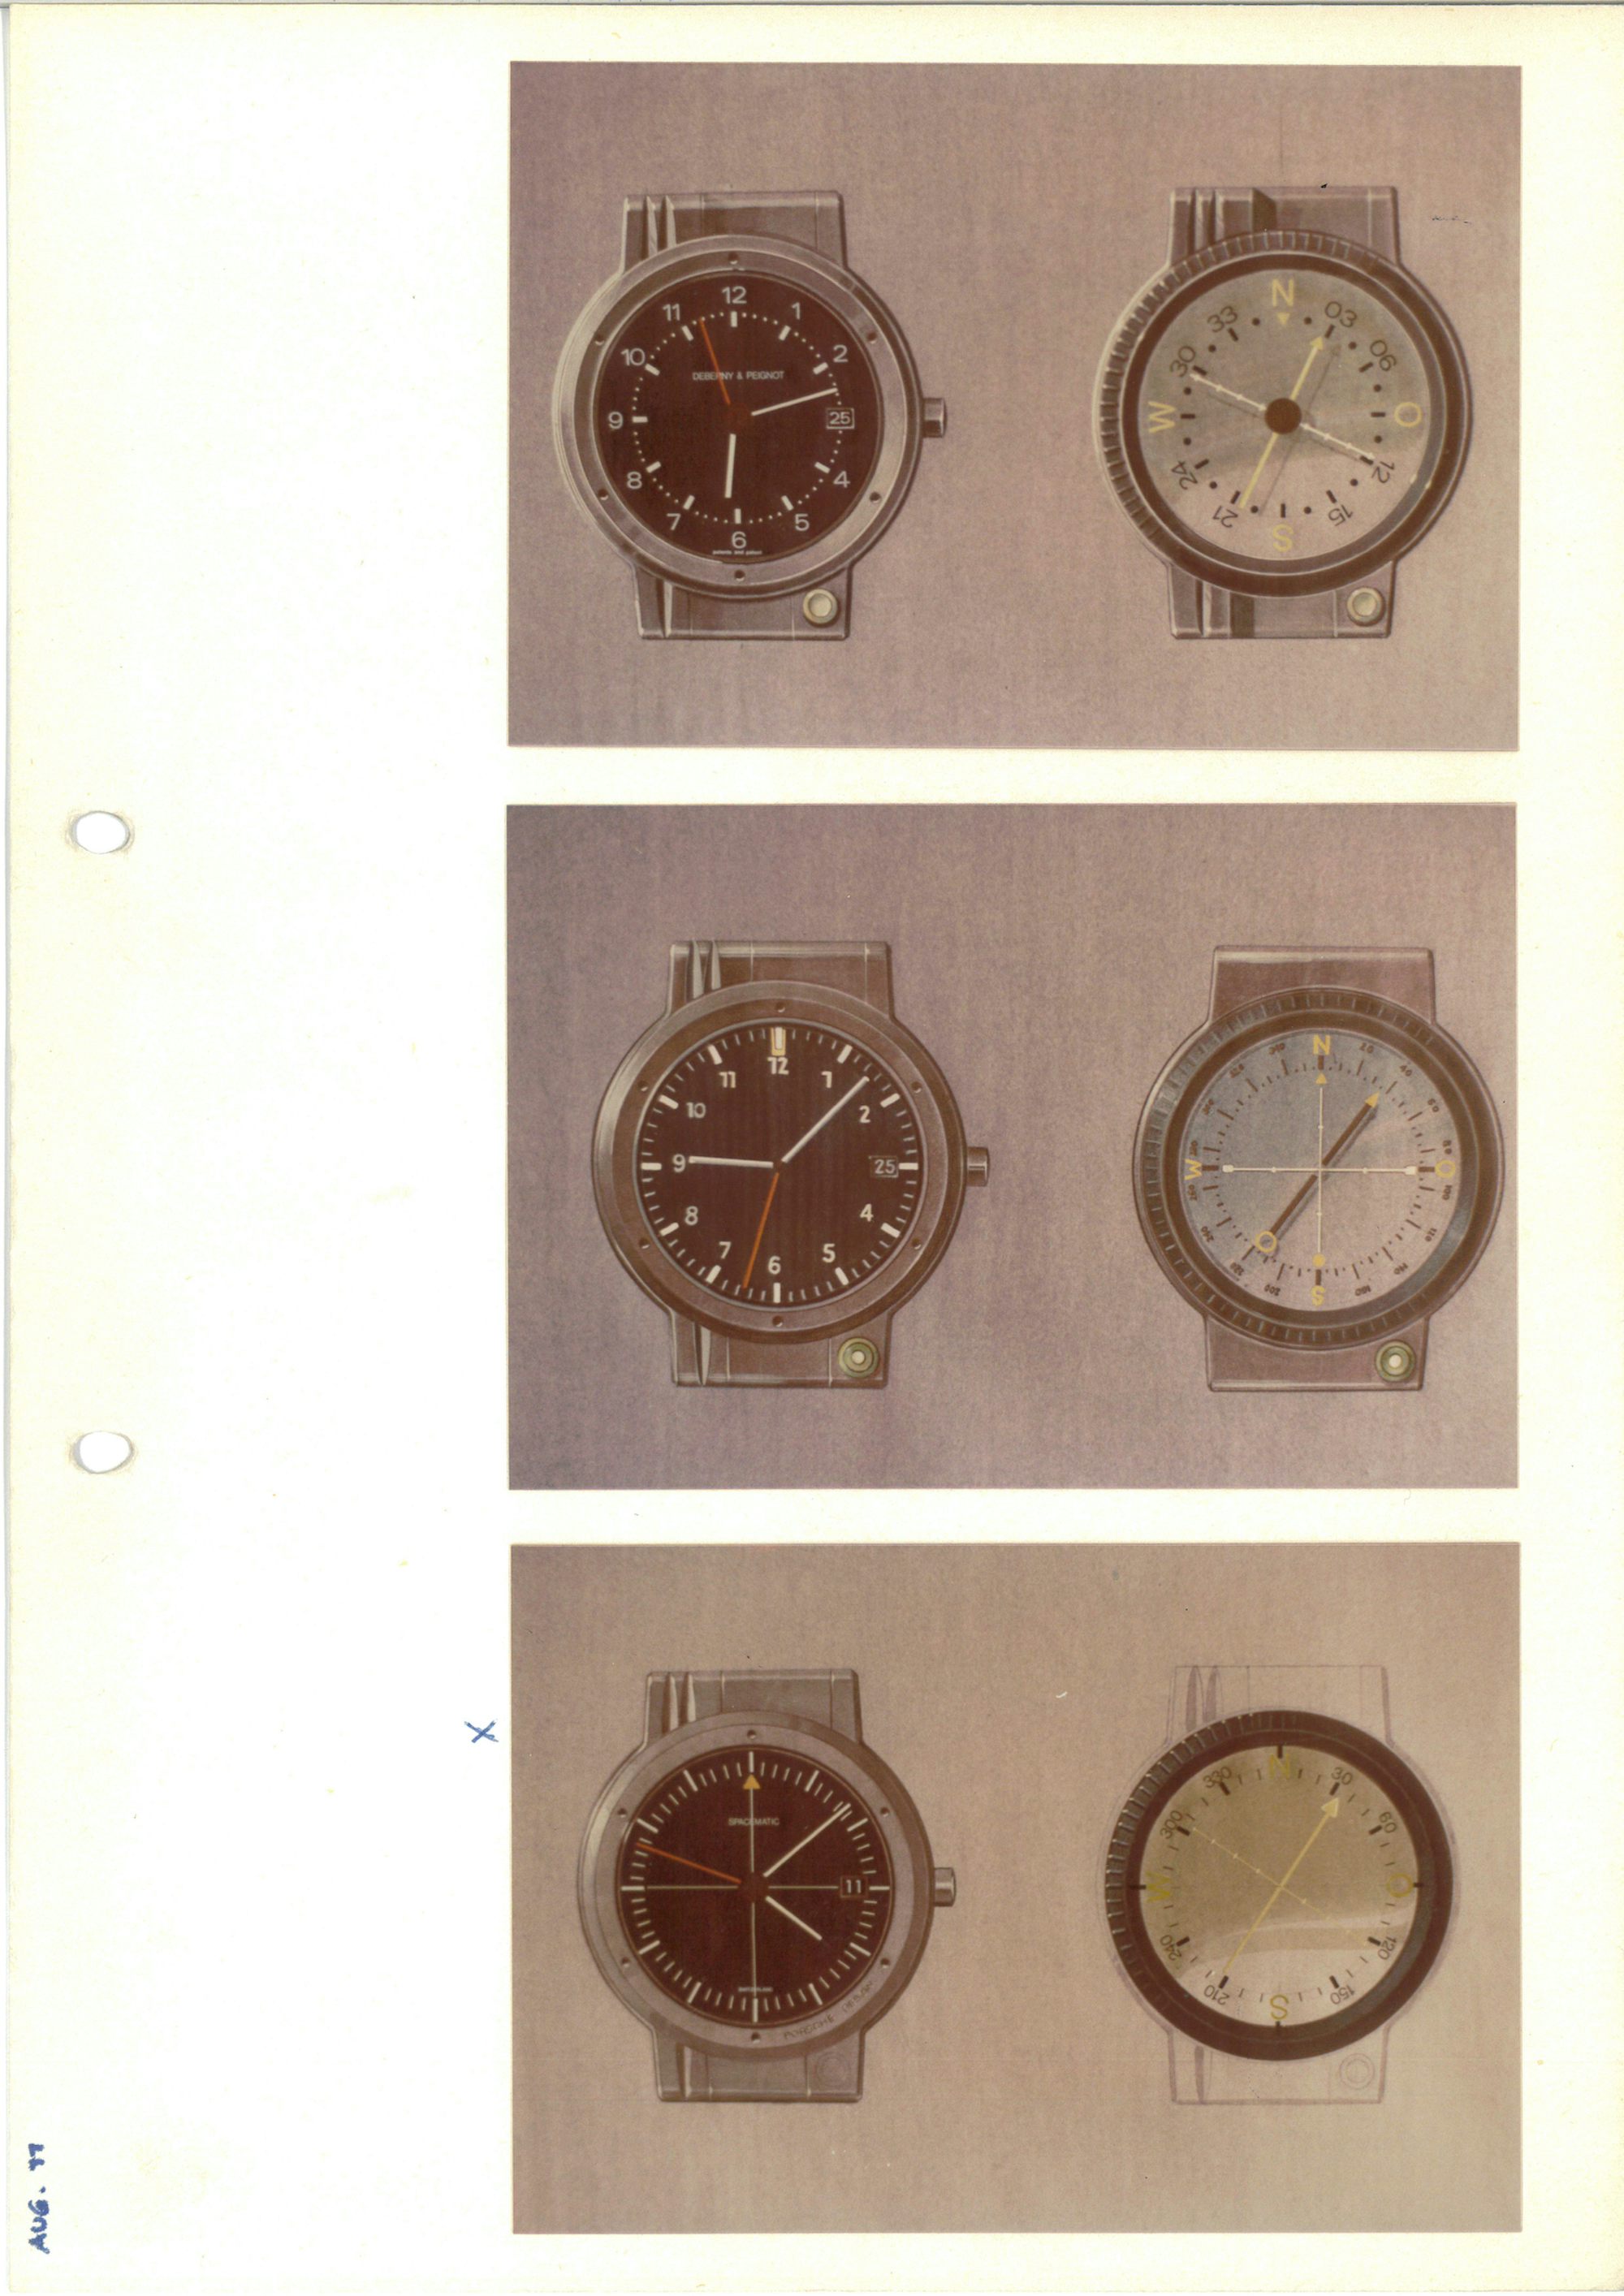 Sketches of early designs of the IWC Porsche Design Compass Watch